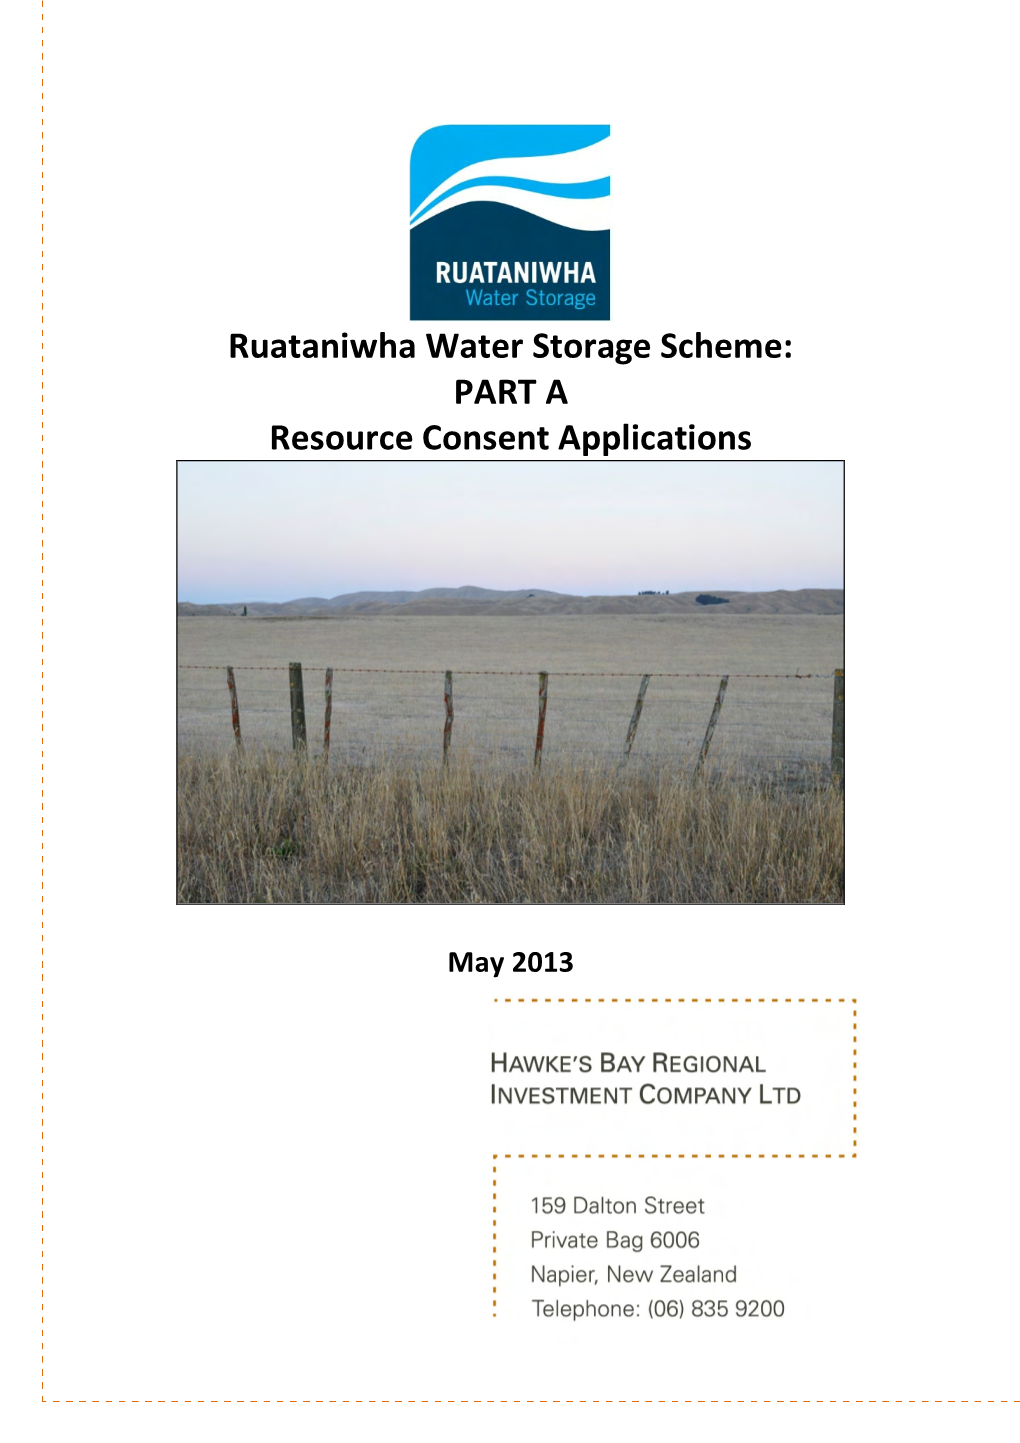 Ruataniwha Water Storage Scheme: PART a Resource Consent Applications